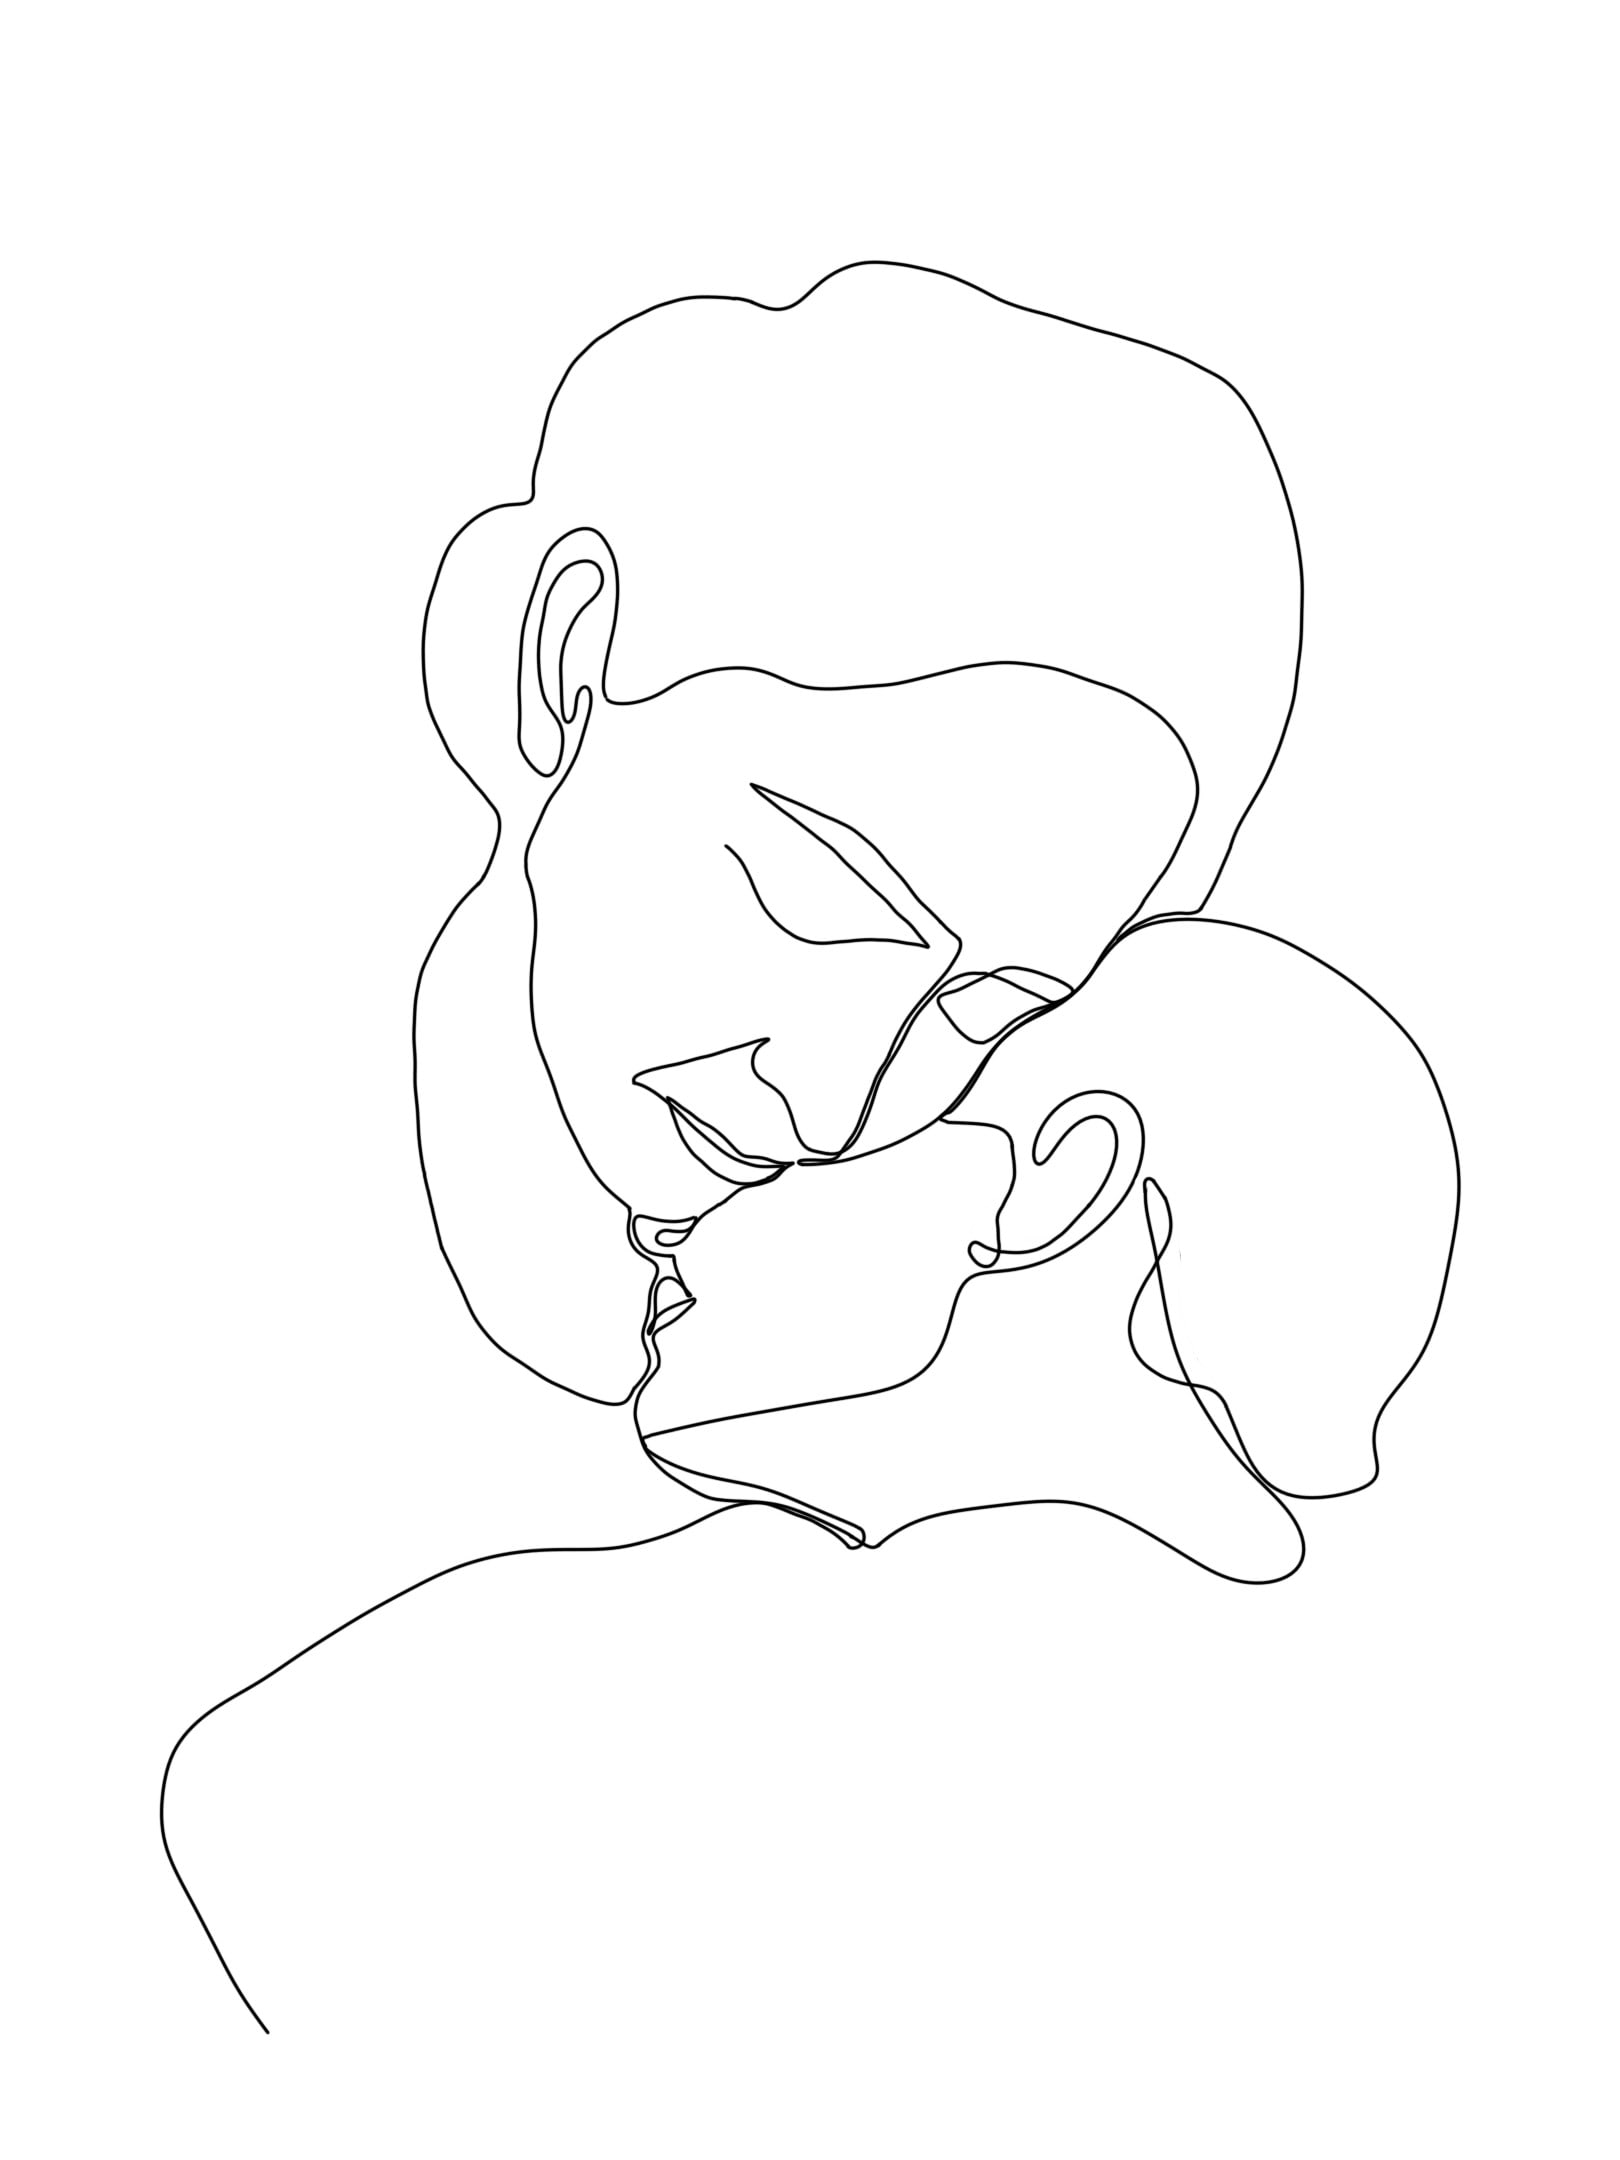 Online Photo To Outline: Free AI Line Art Generator